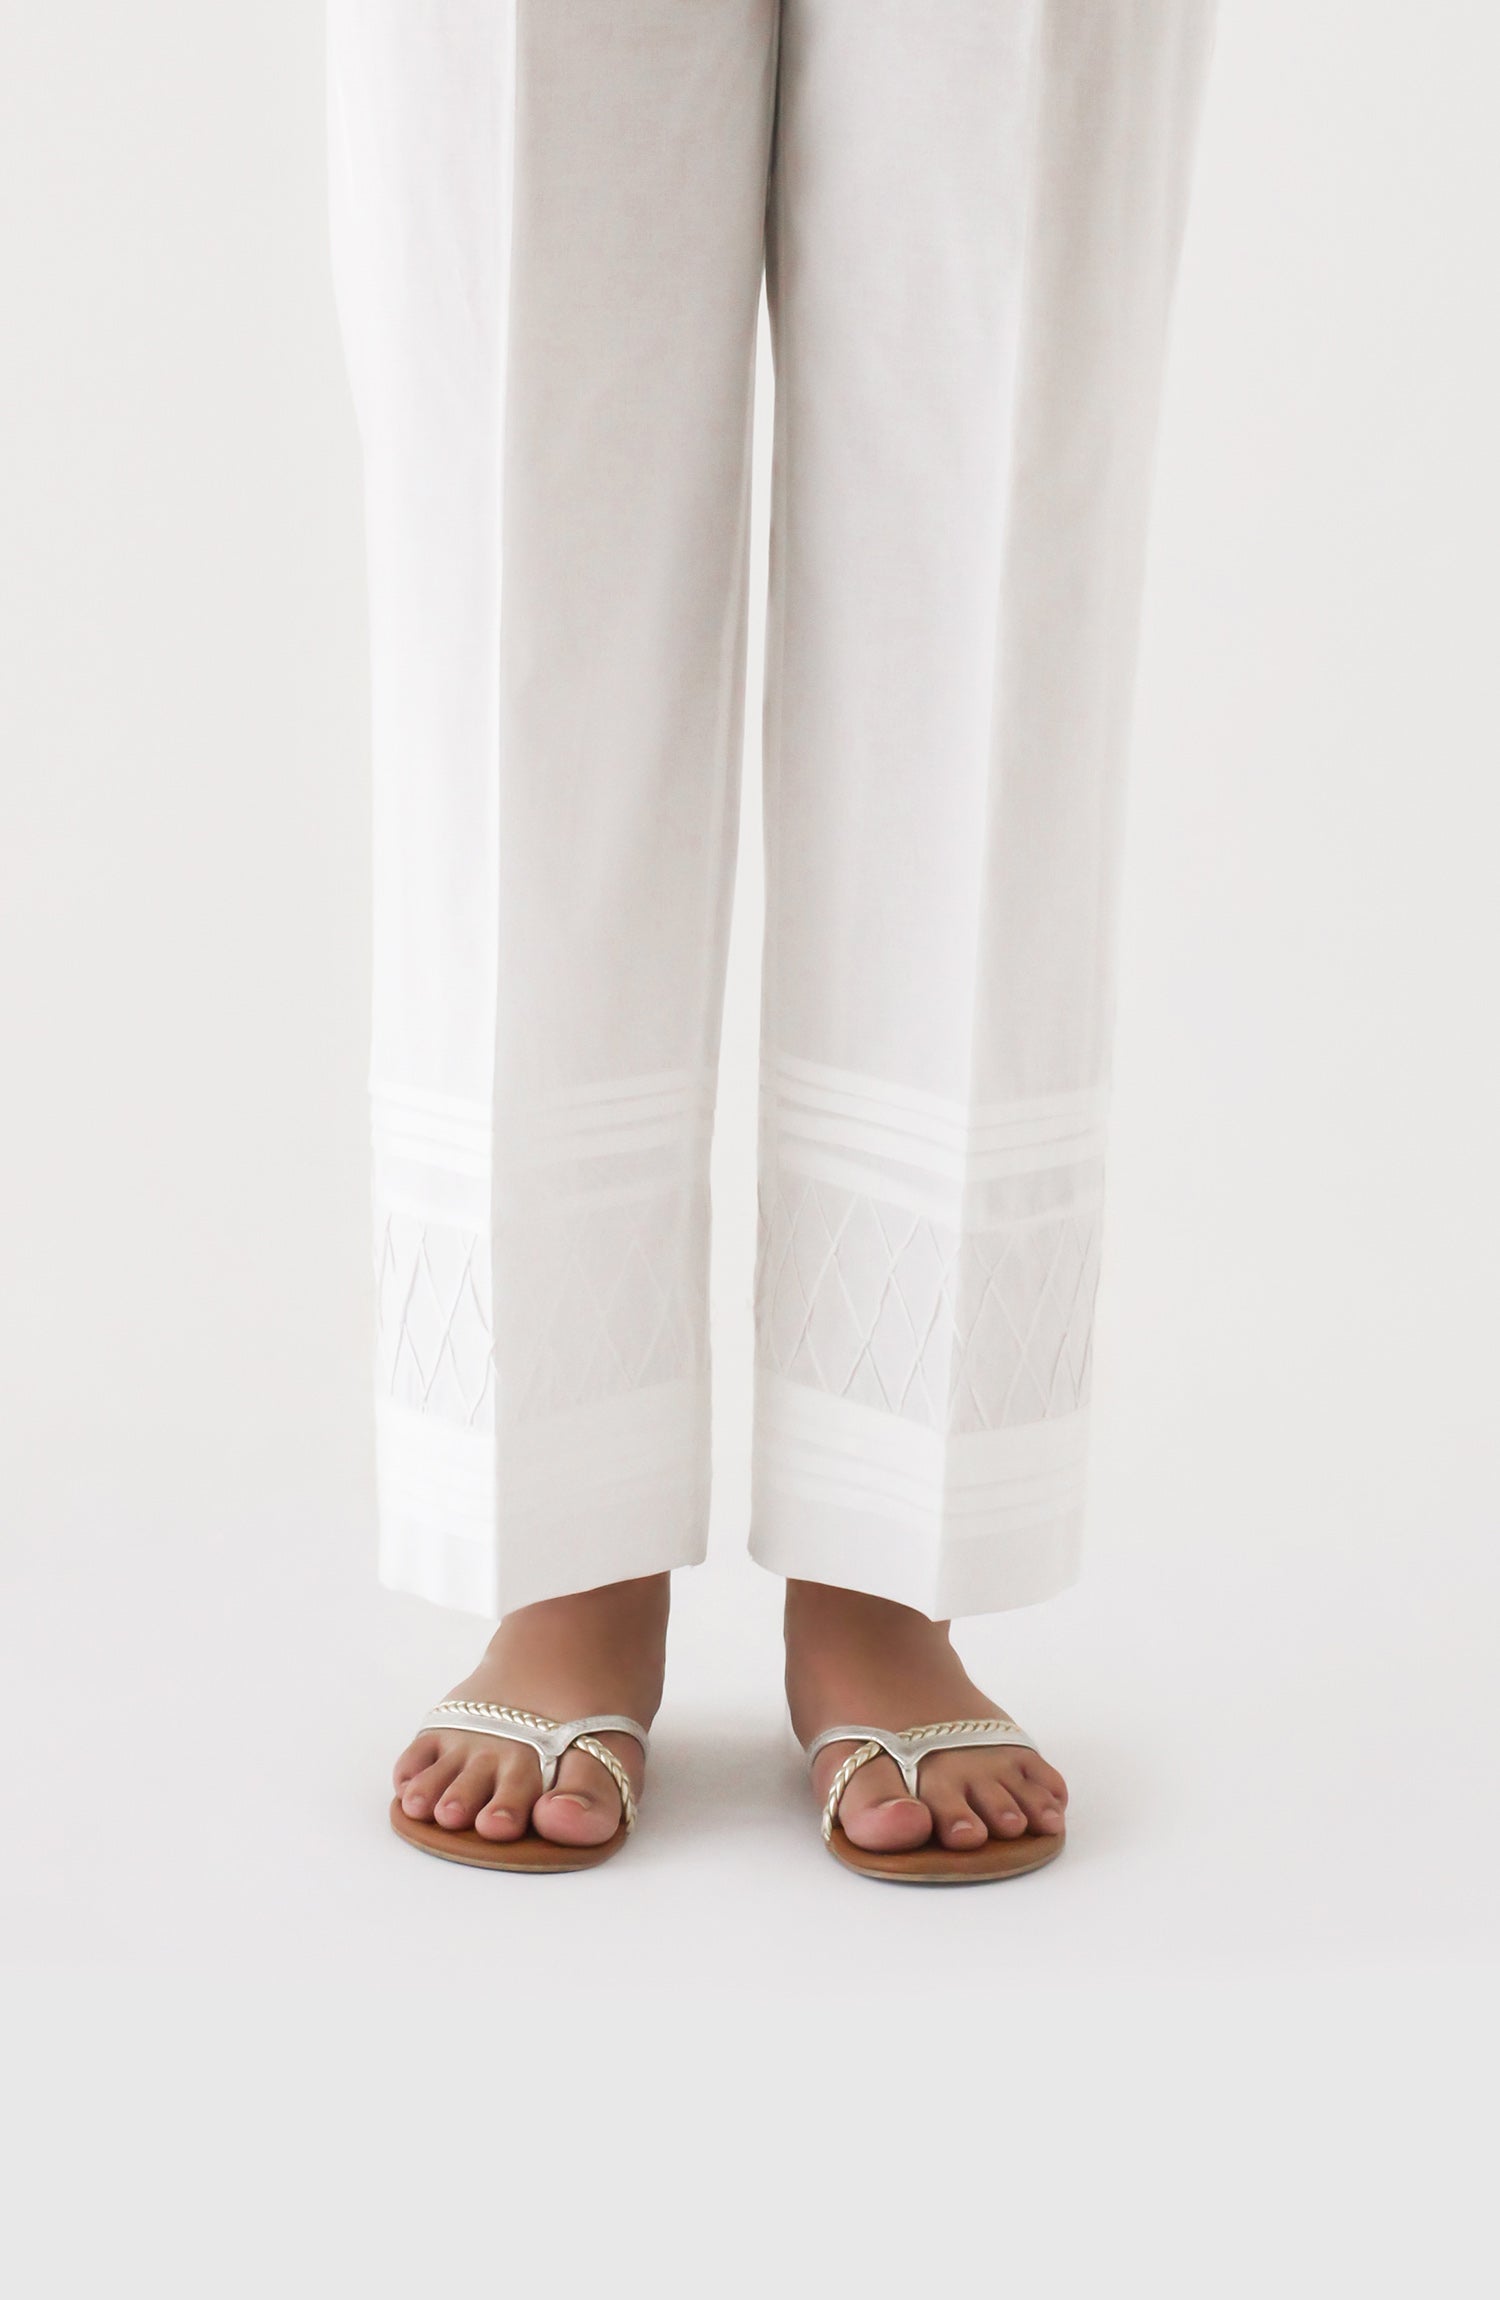 NRP-121/S WHITE CAMBRIC SCPANTS STITCHED BOTTOMS PANTS